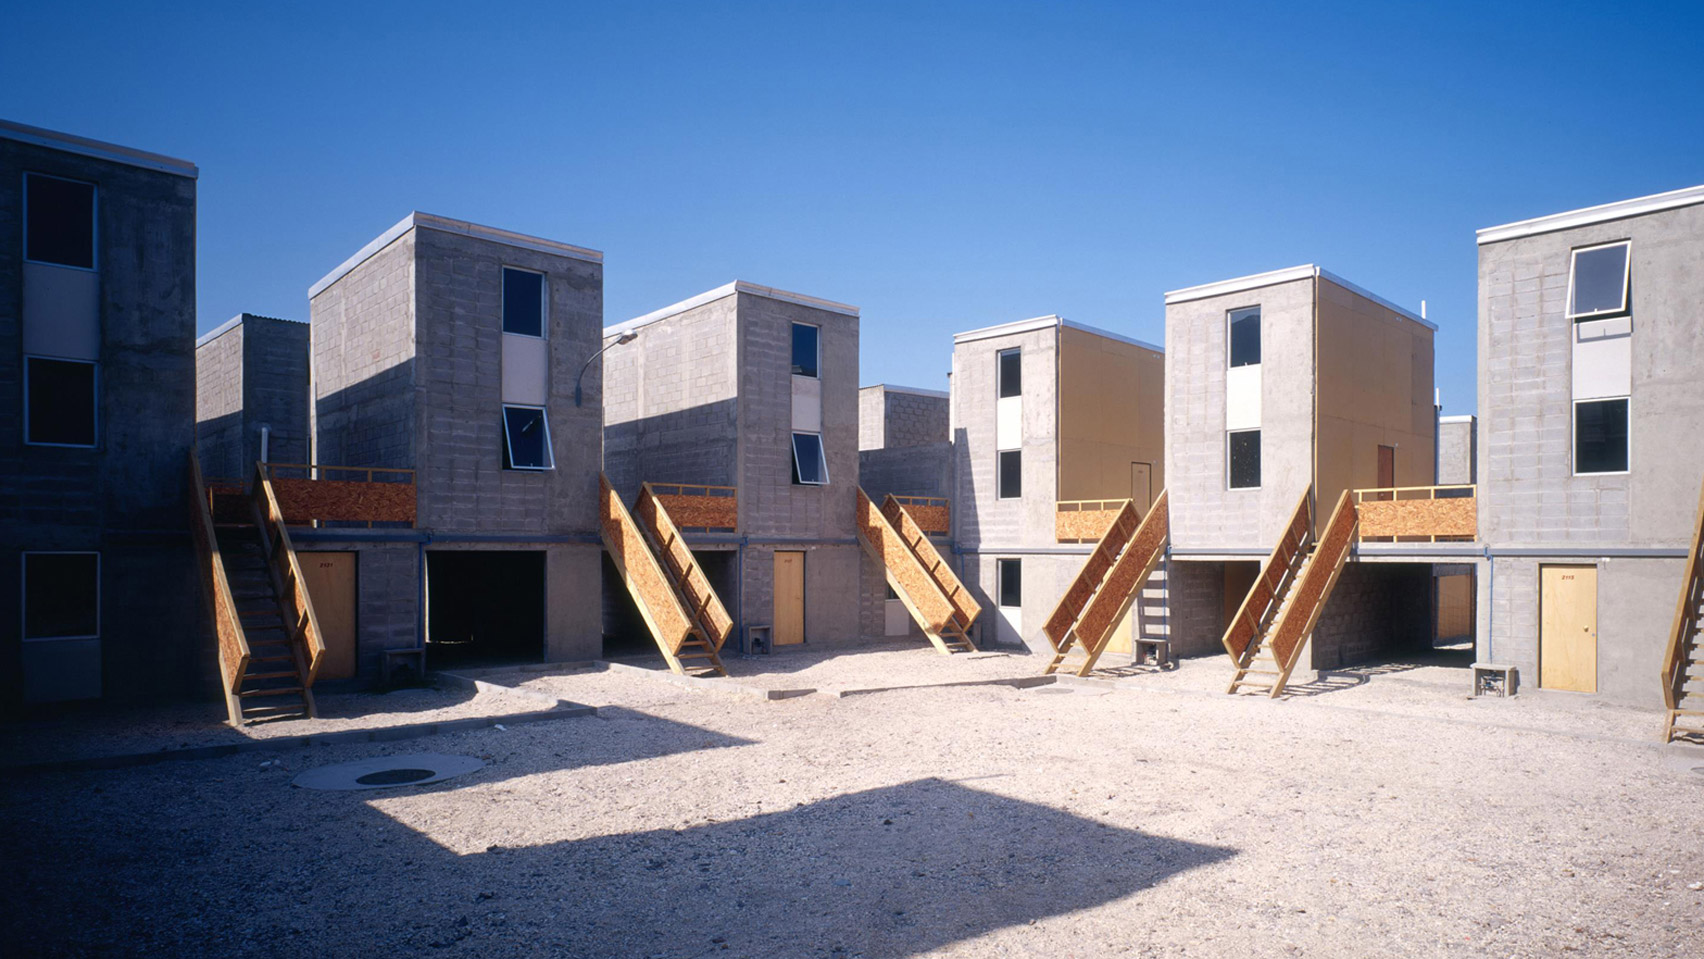 Quinta Monroy Housing project by Alejandro Aravena's Elemental, who have ended their unpaid internships